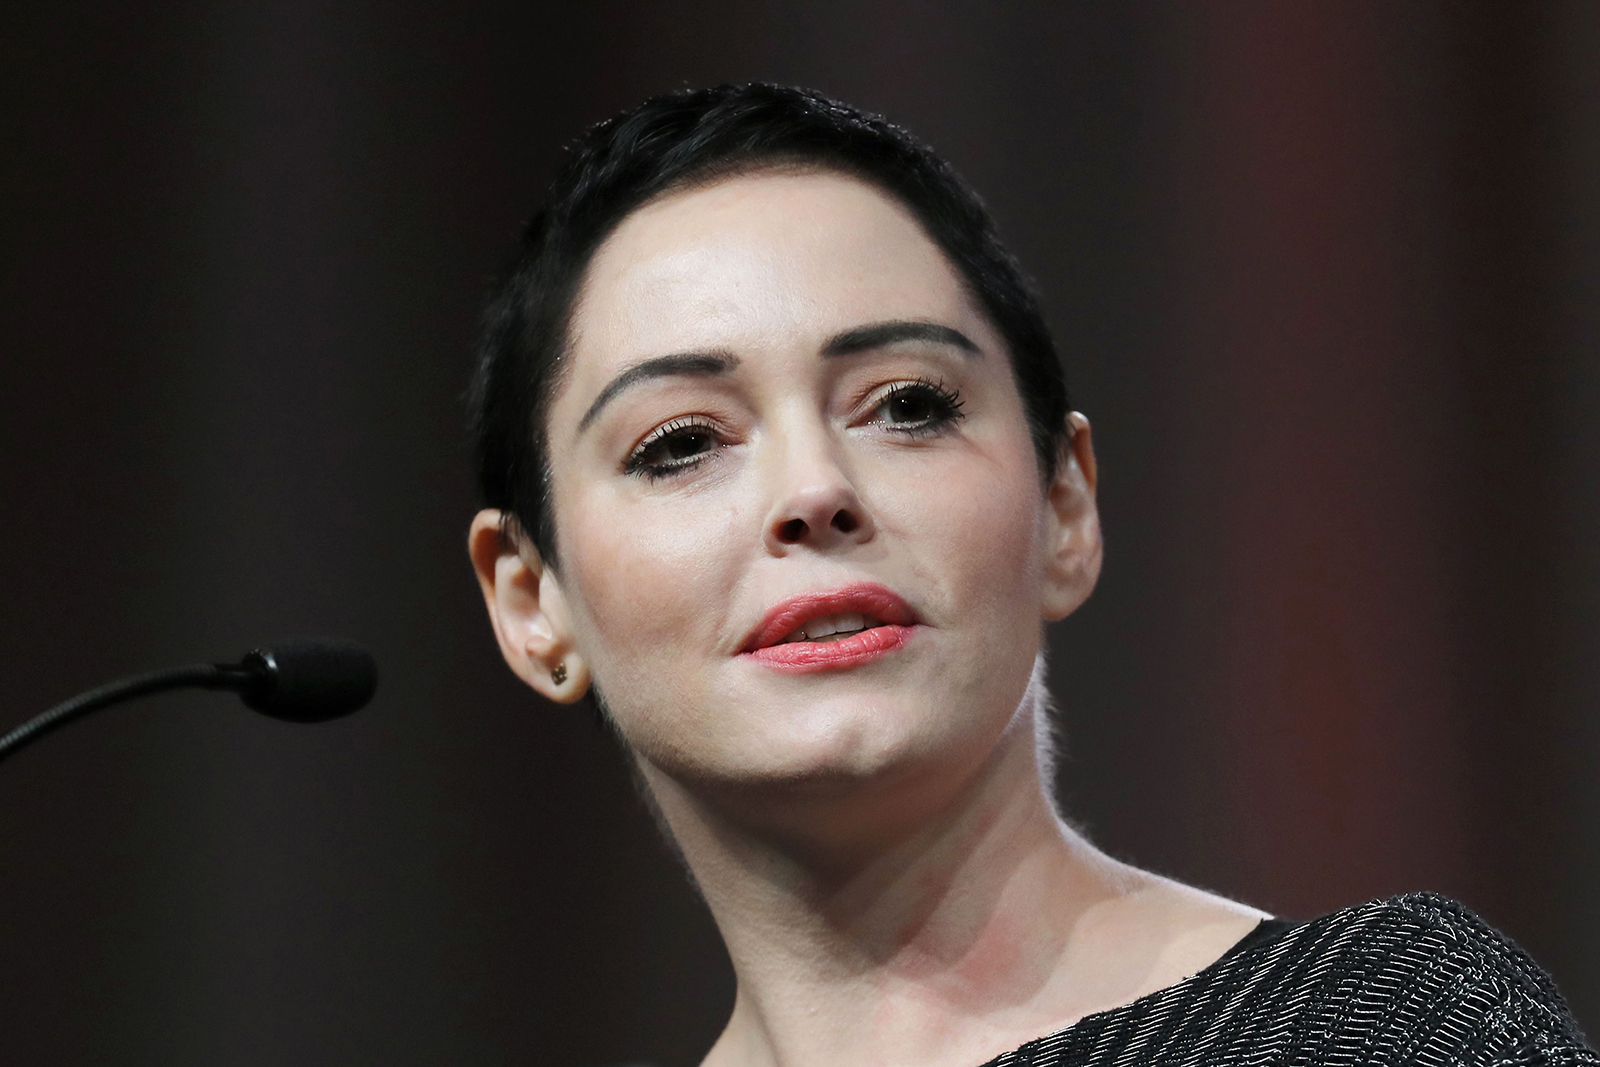 Rose McGowan has always bared her soul publicly, but she went full nude soul on social media when she confessed her true purpose for being in Hollywood.